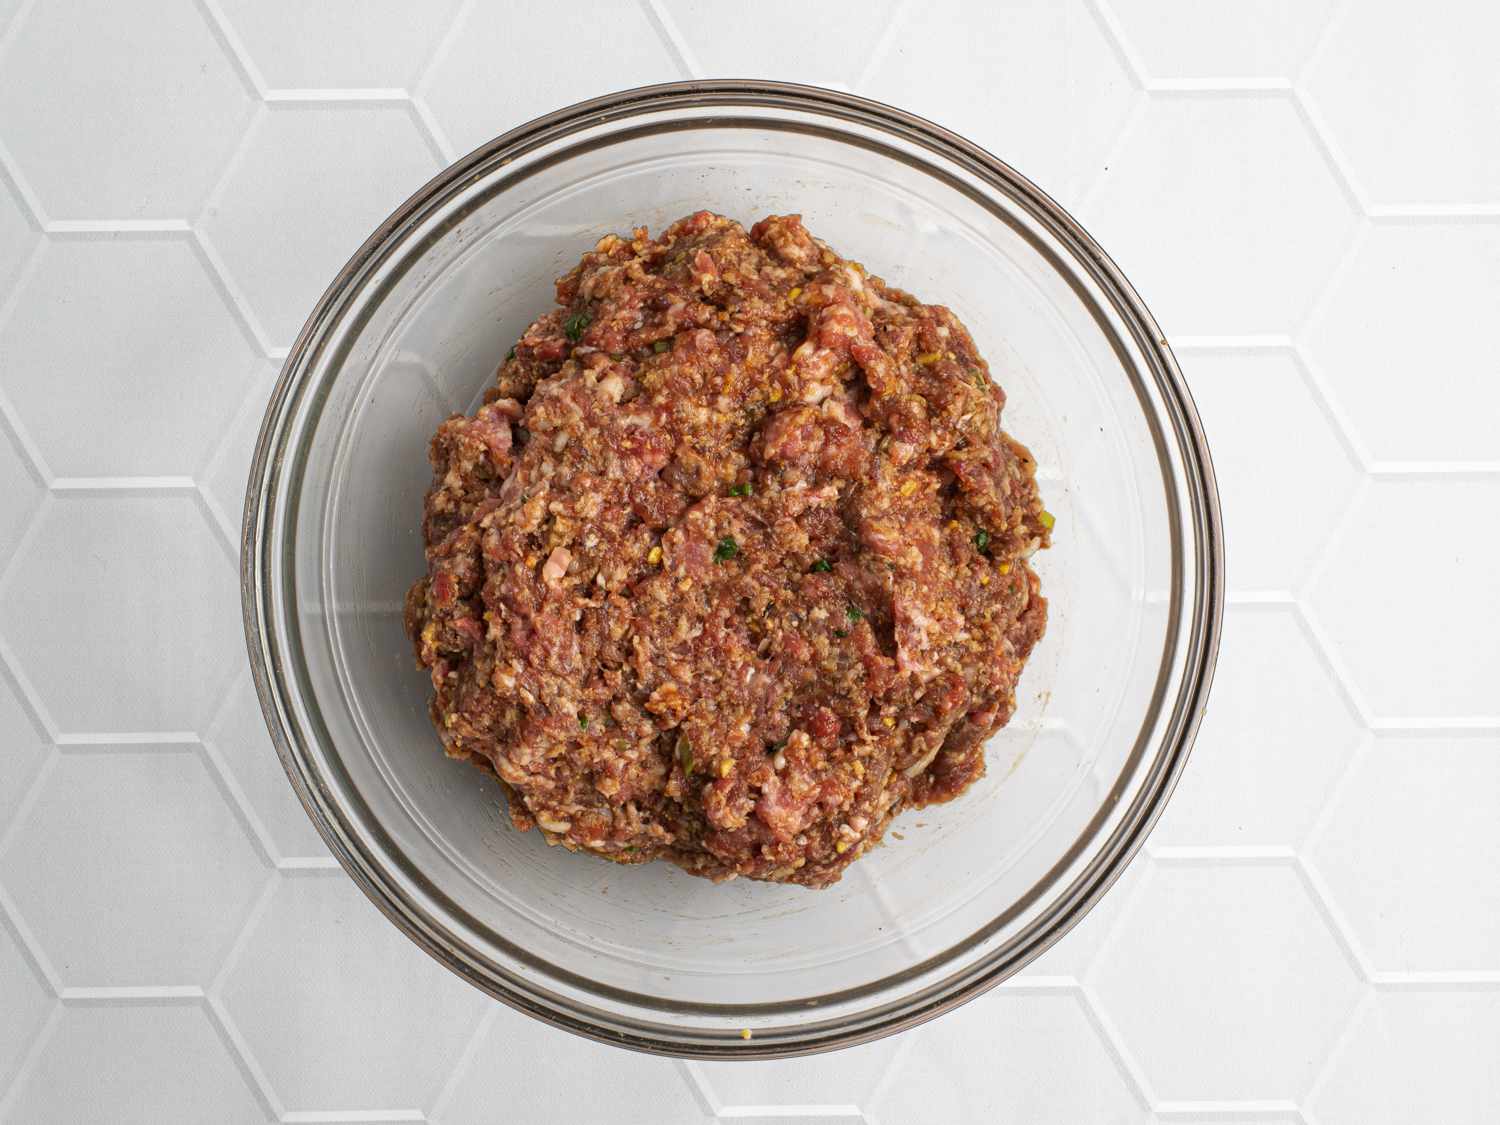 Ground pork, ground beef, hoisin sauce, soy sauce, ginger, garlic, minced scallion, honey, panko breadcrumbs, lightly beaten egg, and freshly ground black pepper mixed together until blended inside a large glass mixing bowl.